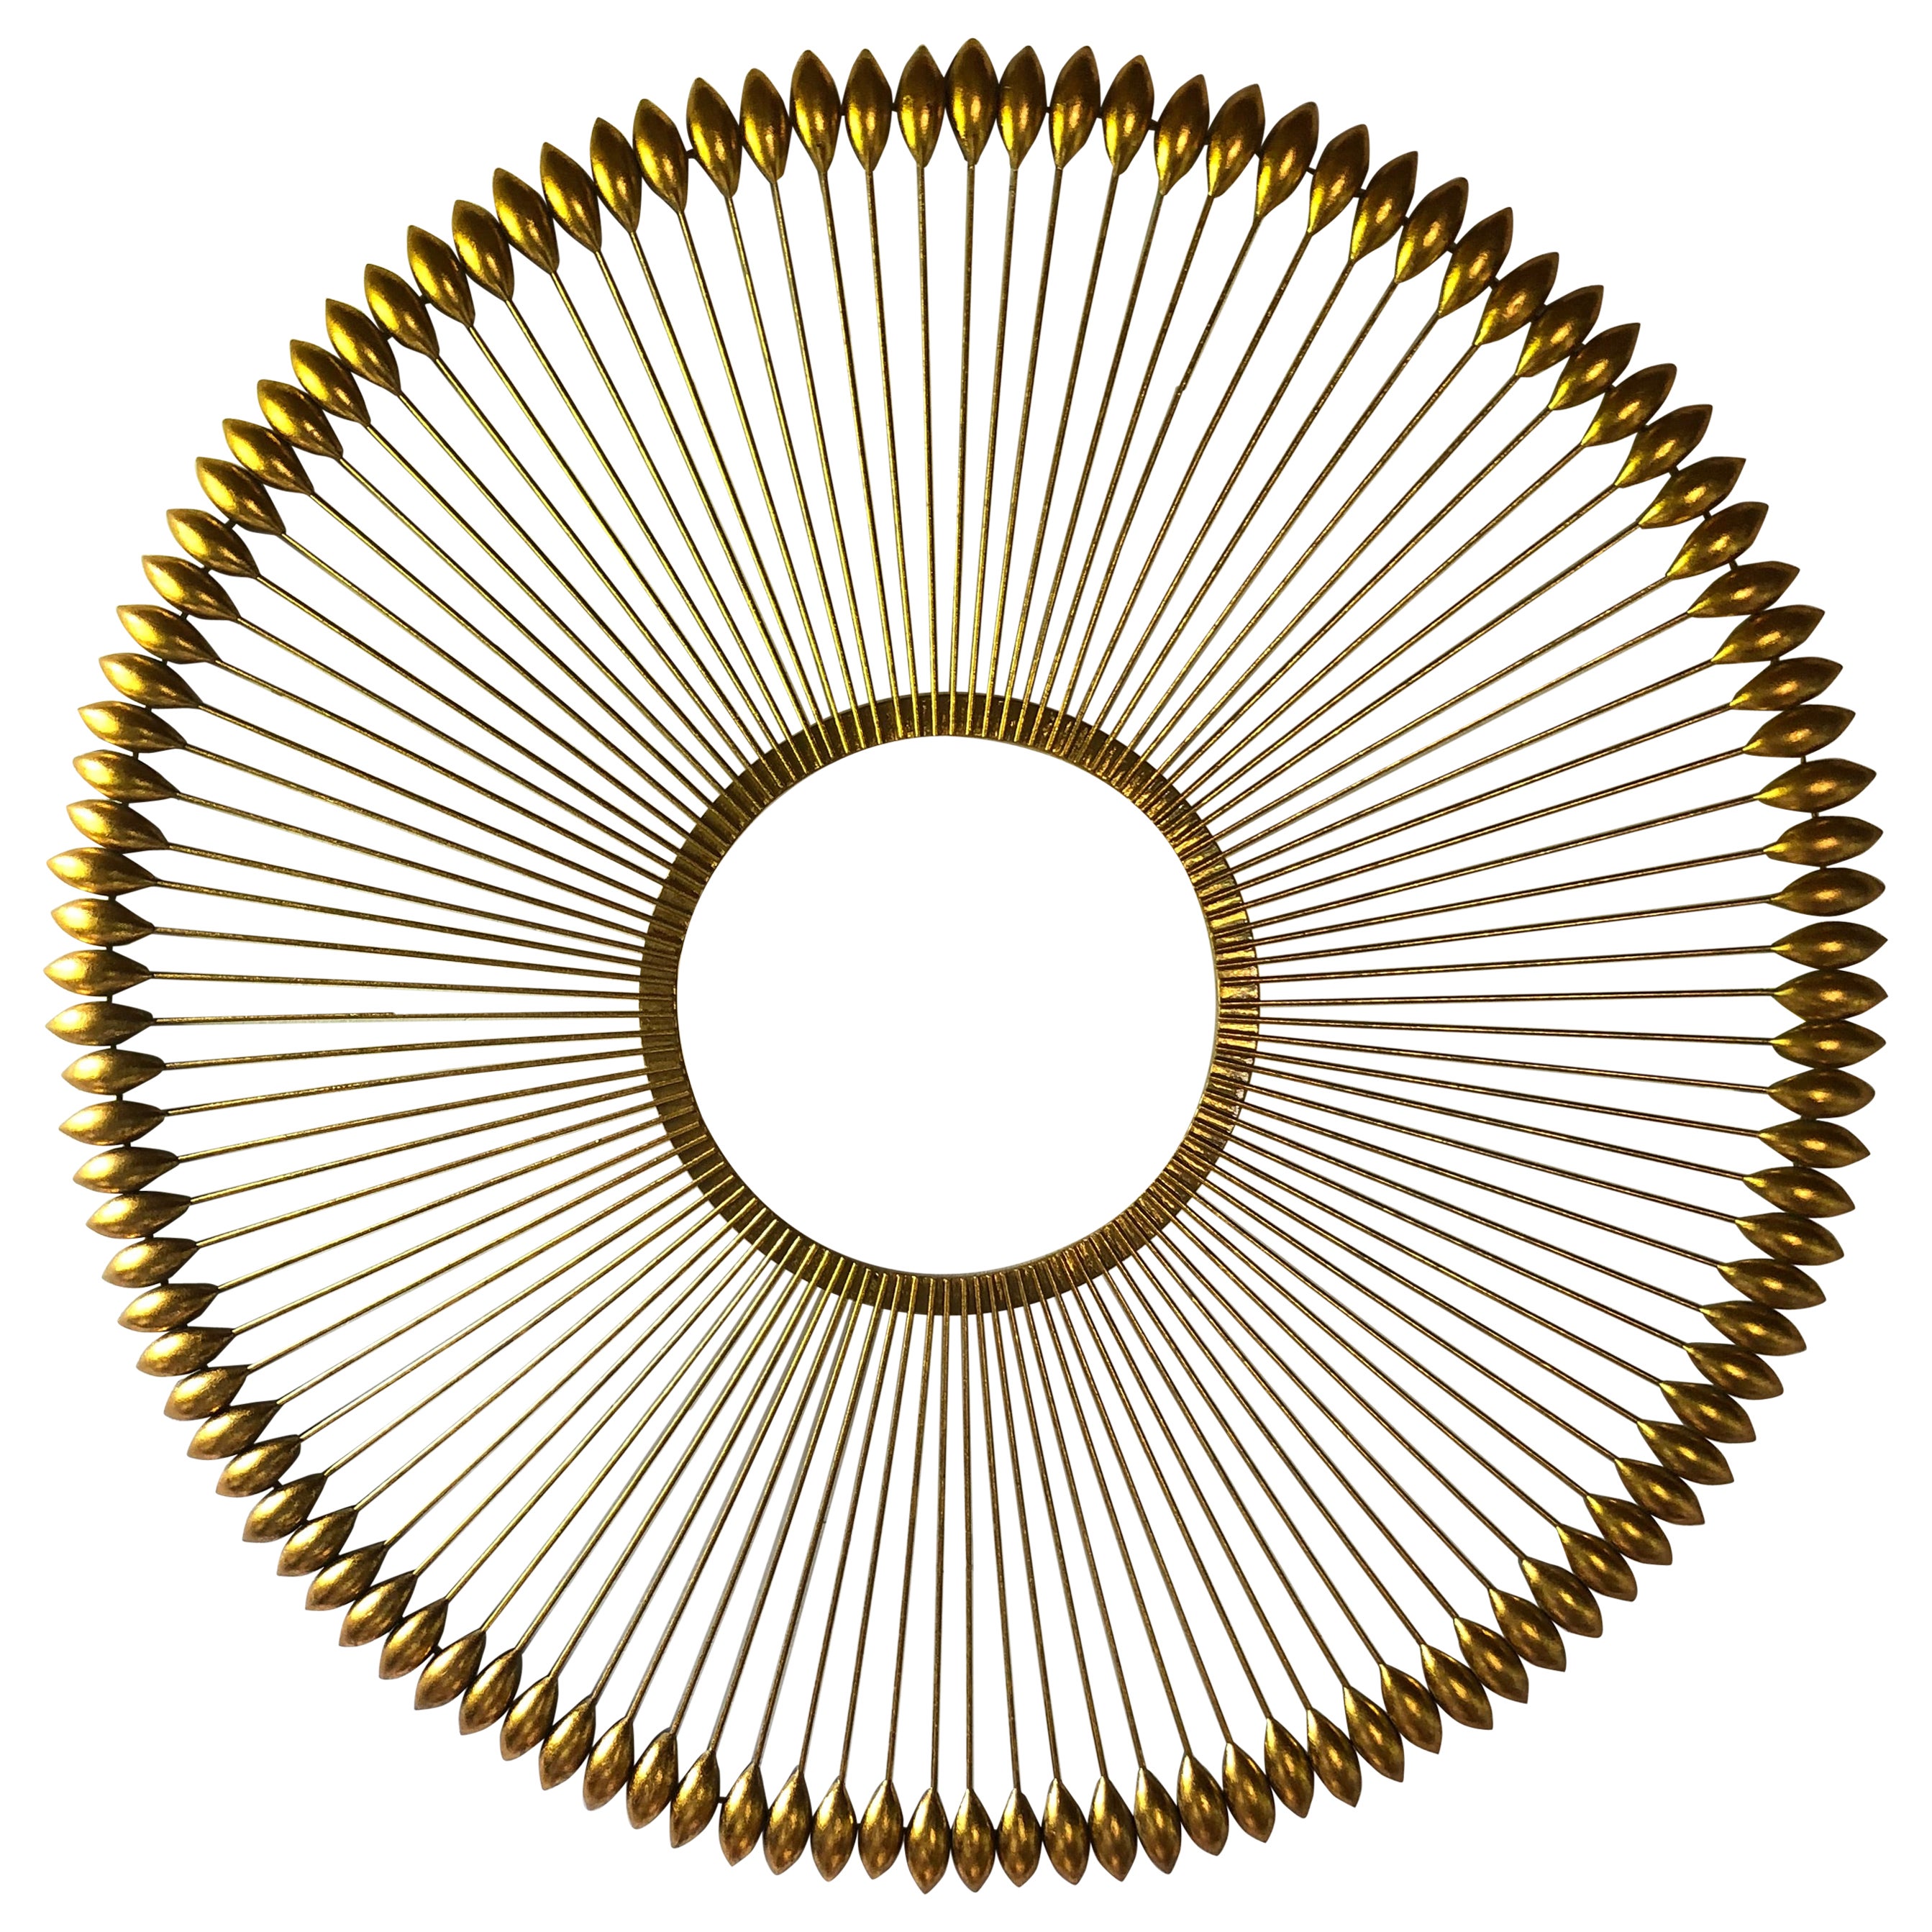 Large Gilded Metal Arrow Motif Round Wall Sculpture For Sale